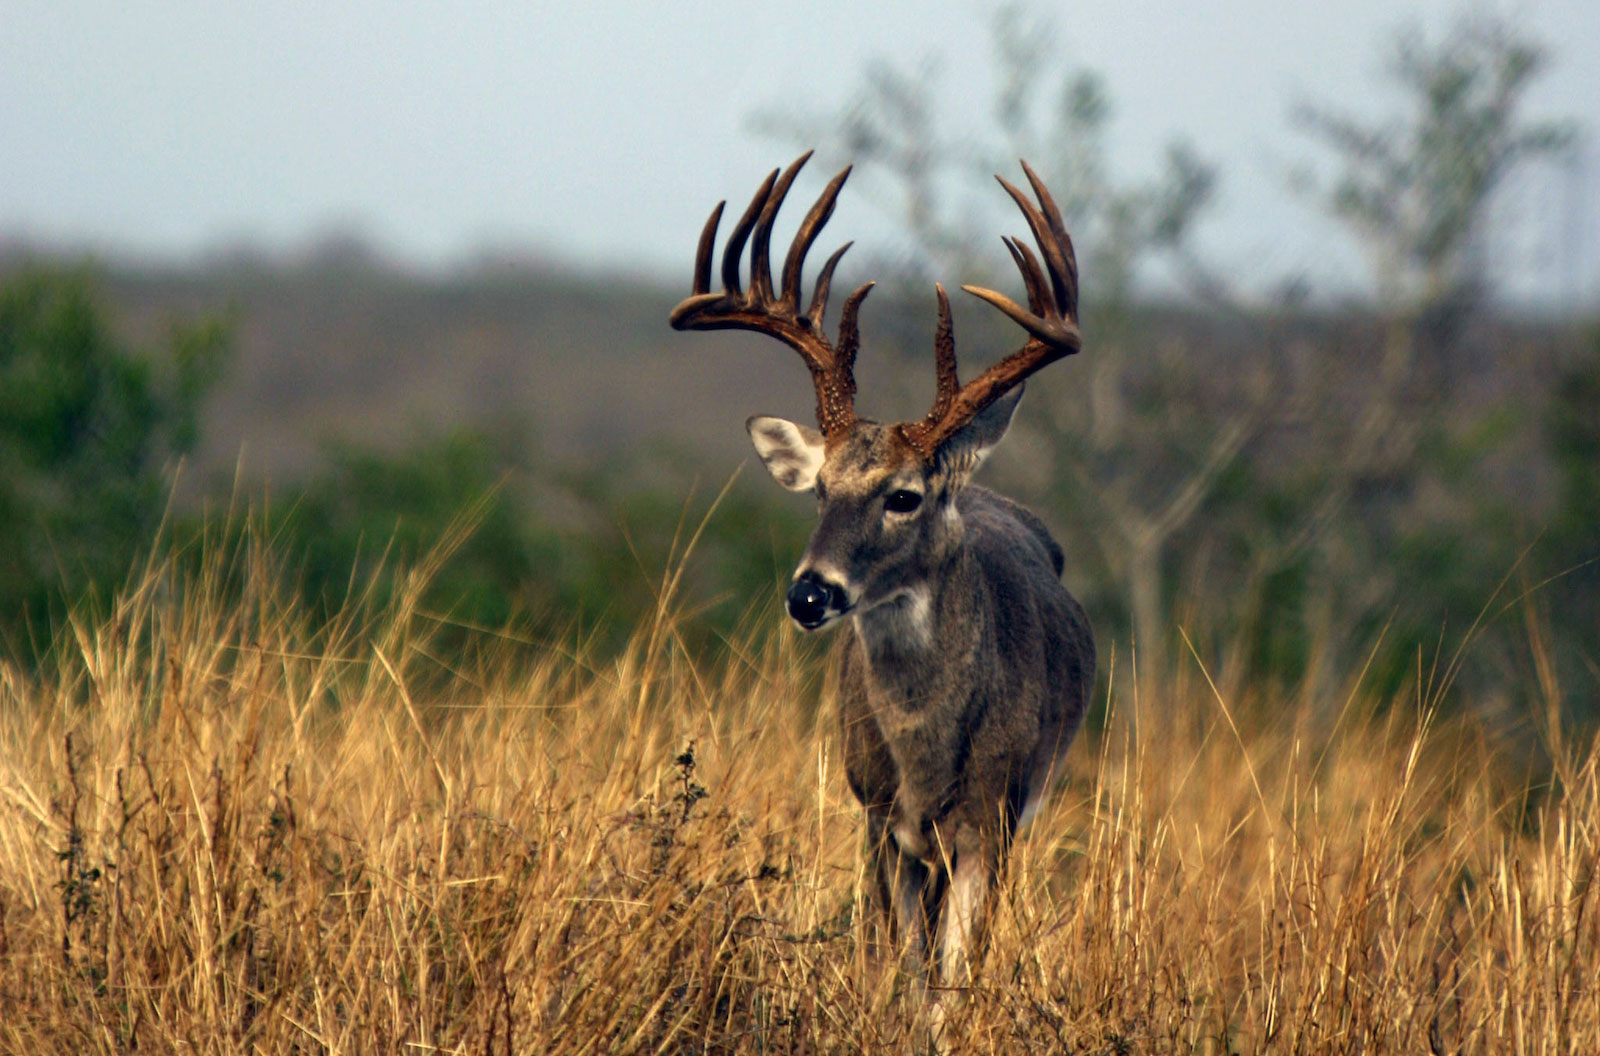 The South (Not the Midwest) Is the Best Region for Mature Bucks